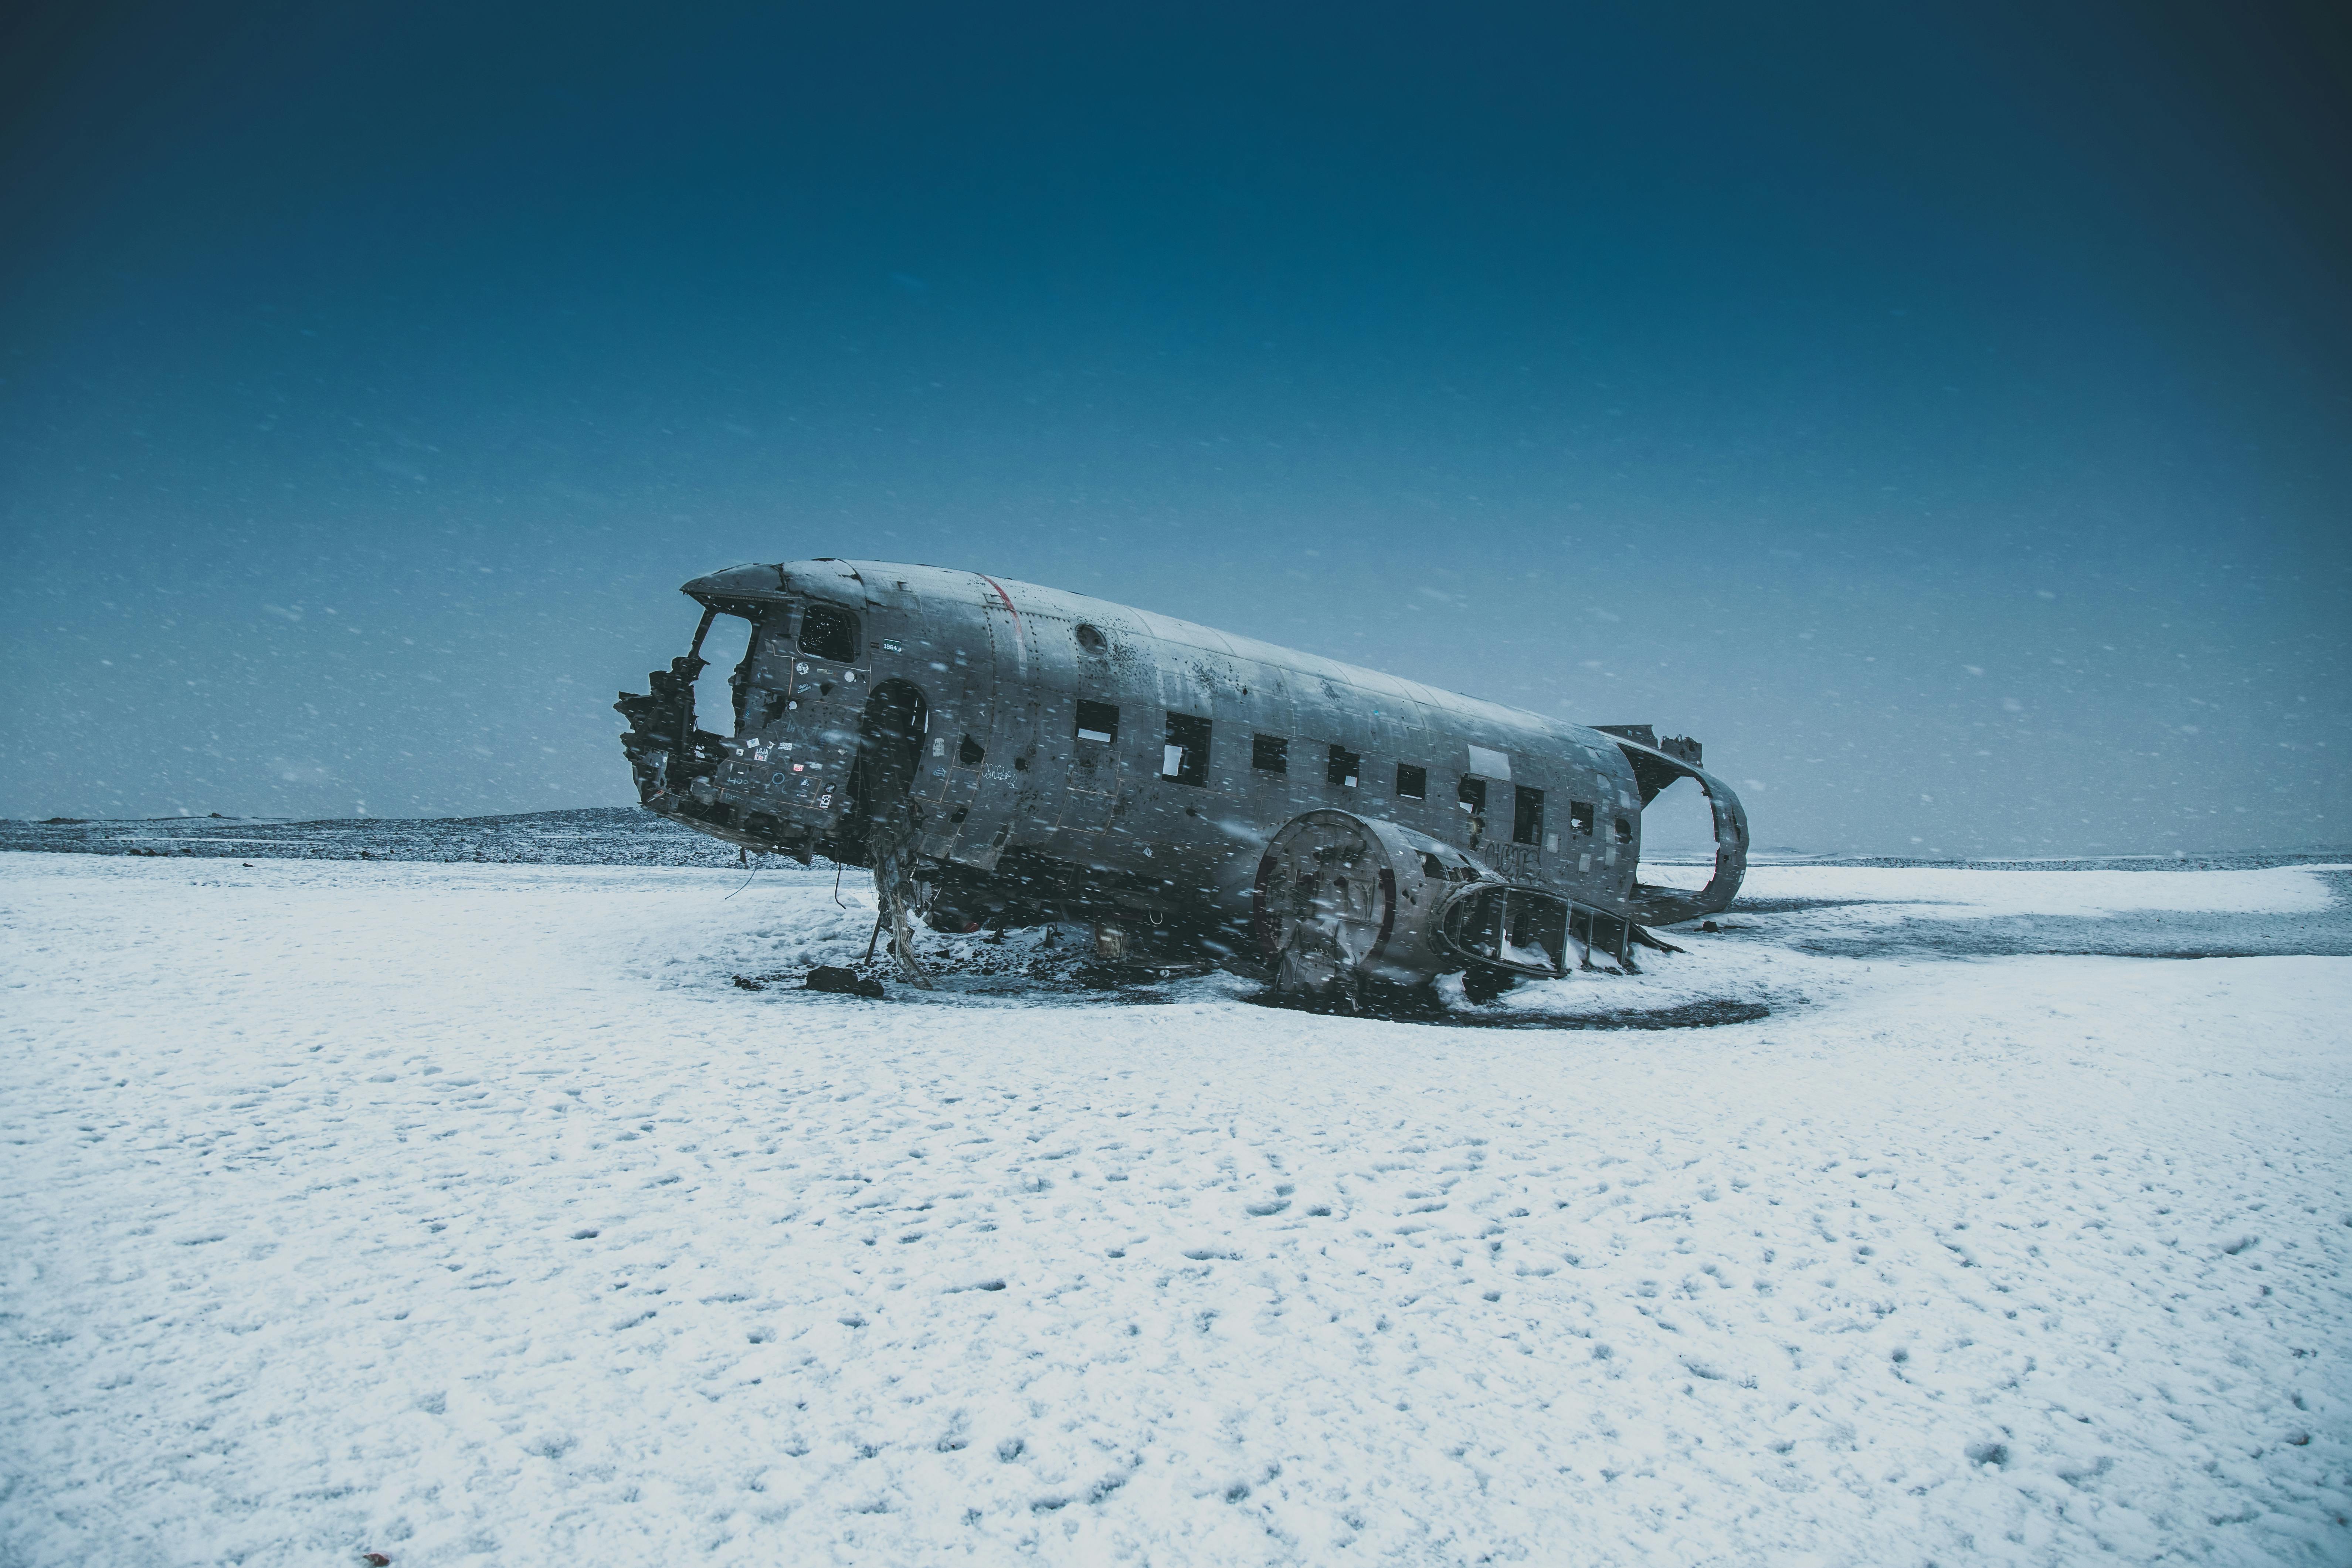 Crashed aircraft after disaster on snowy land under sky · Free Stock Photo